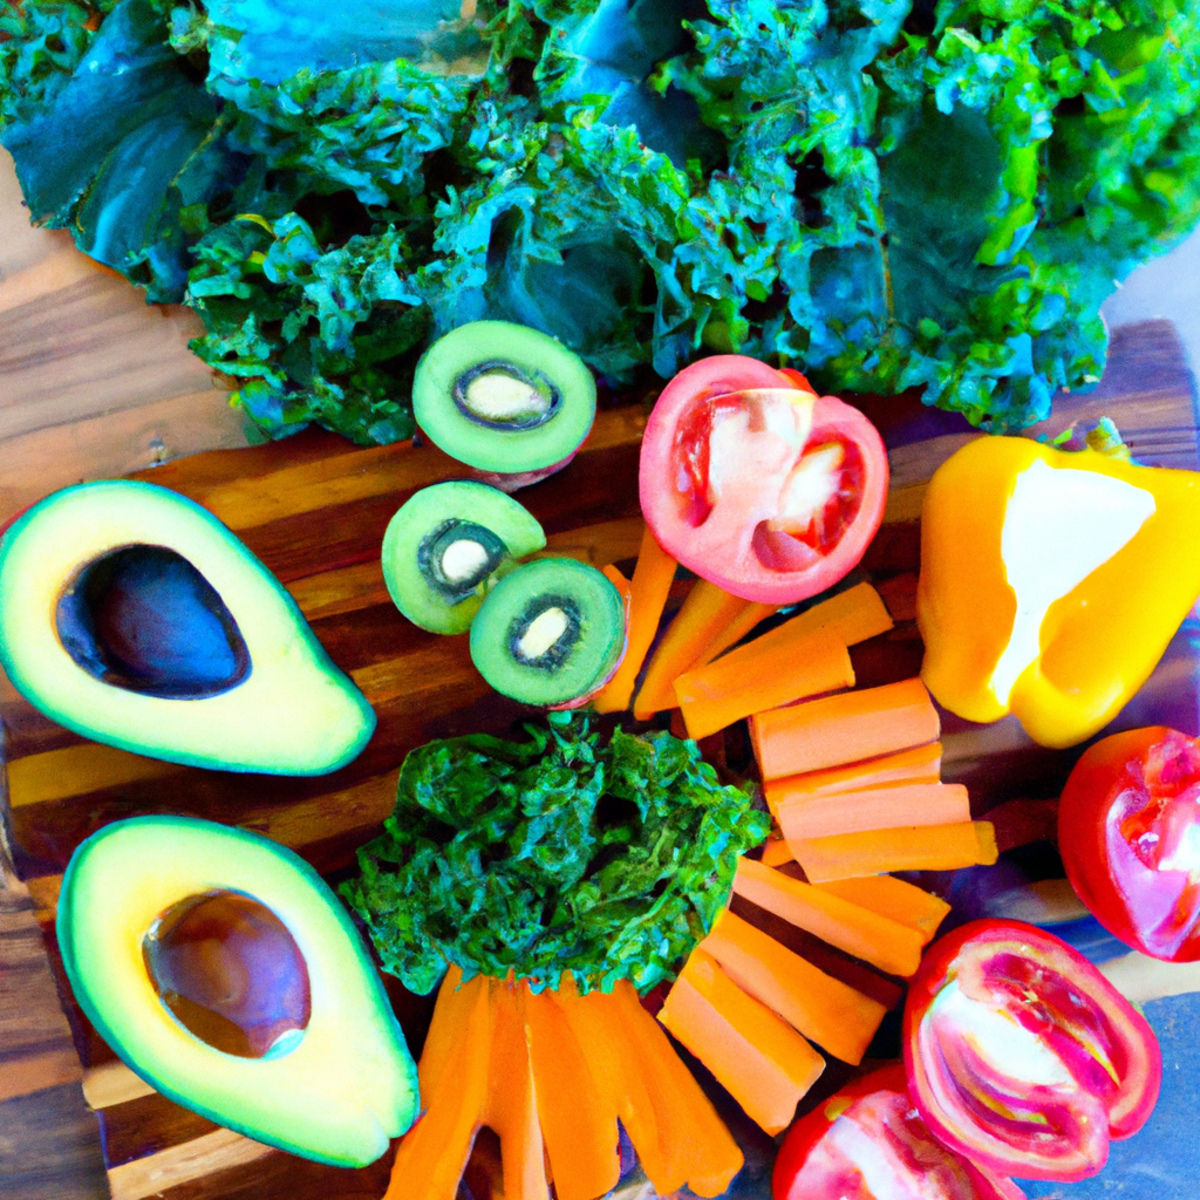 The photo depicts a colorful array of fruits and vegetables arranged on a wooden cutting board. A ripe avocado, sliced tomatoes, and a bunch of vibrant green kale leaves are prominently displayed in the center of the image. Surrounding them are sliced bell peppers, carrots, and cucumbers, all arranged in a visually appealing pattern. The photo captures the essence of the article's focus on functional foods and their role in weight management and metabolism.